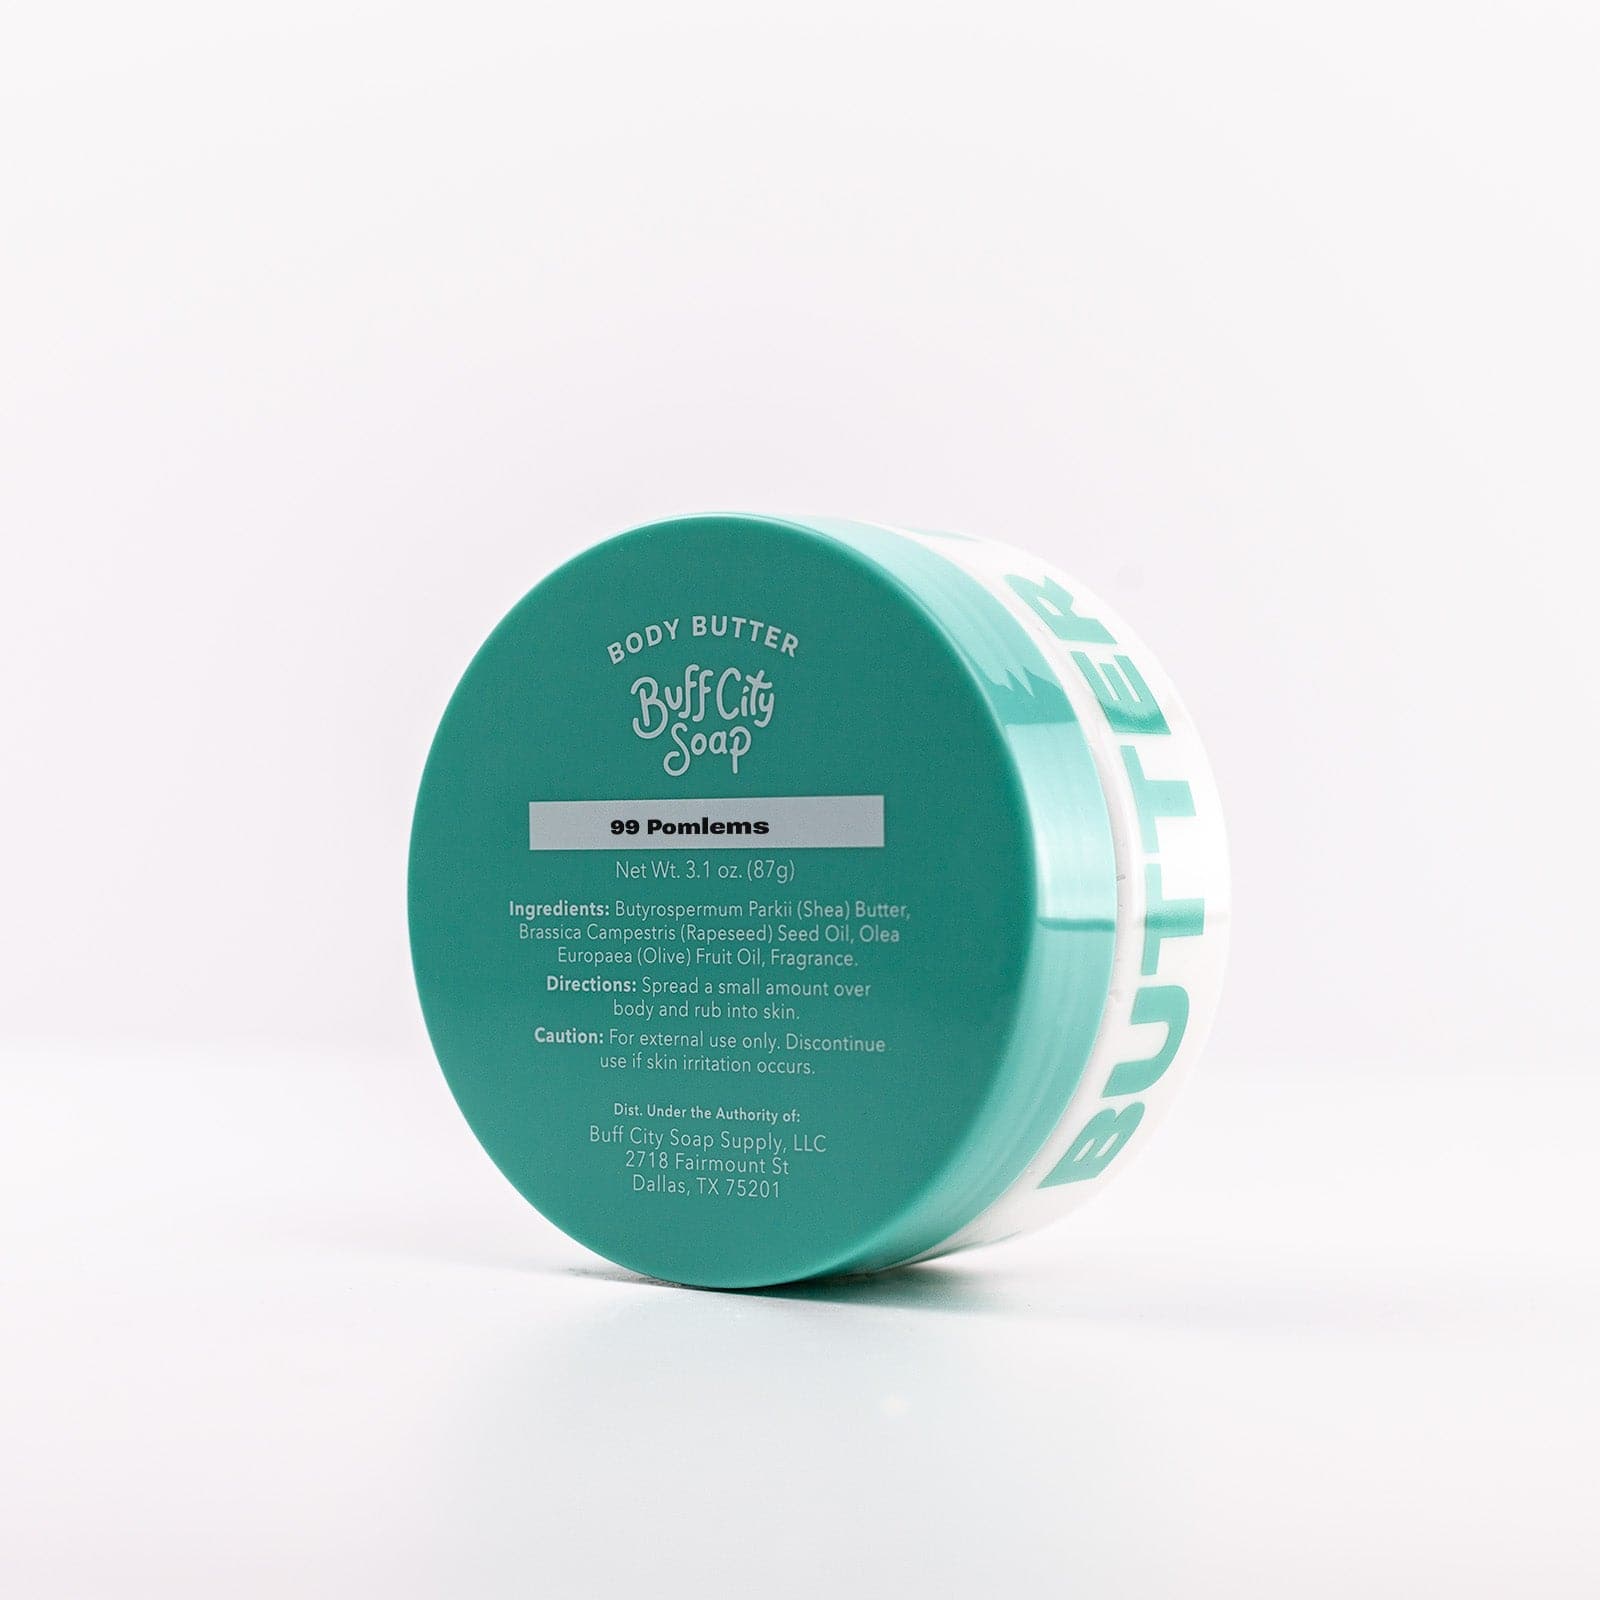 99 Pomlems Body Butter container with teal lid standing upright and angled against white background